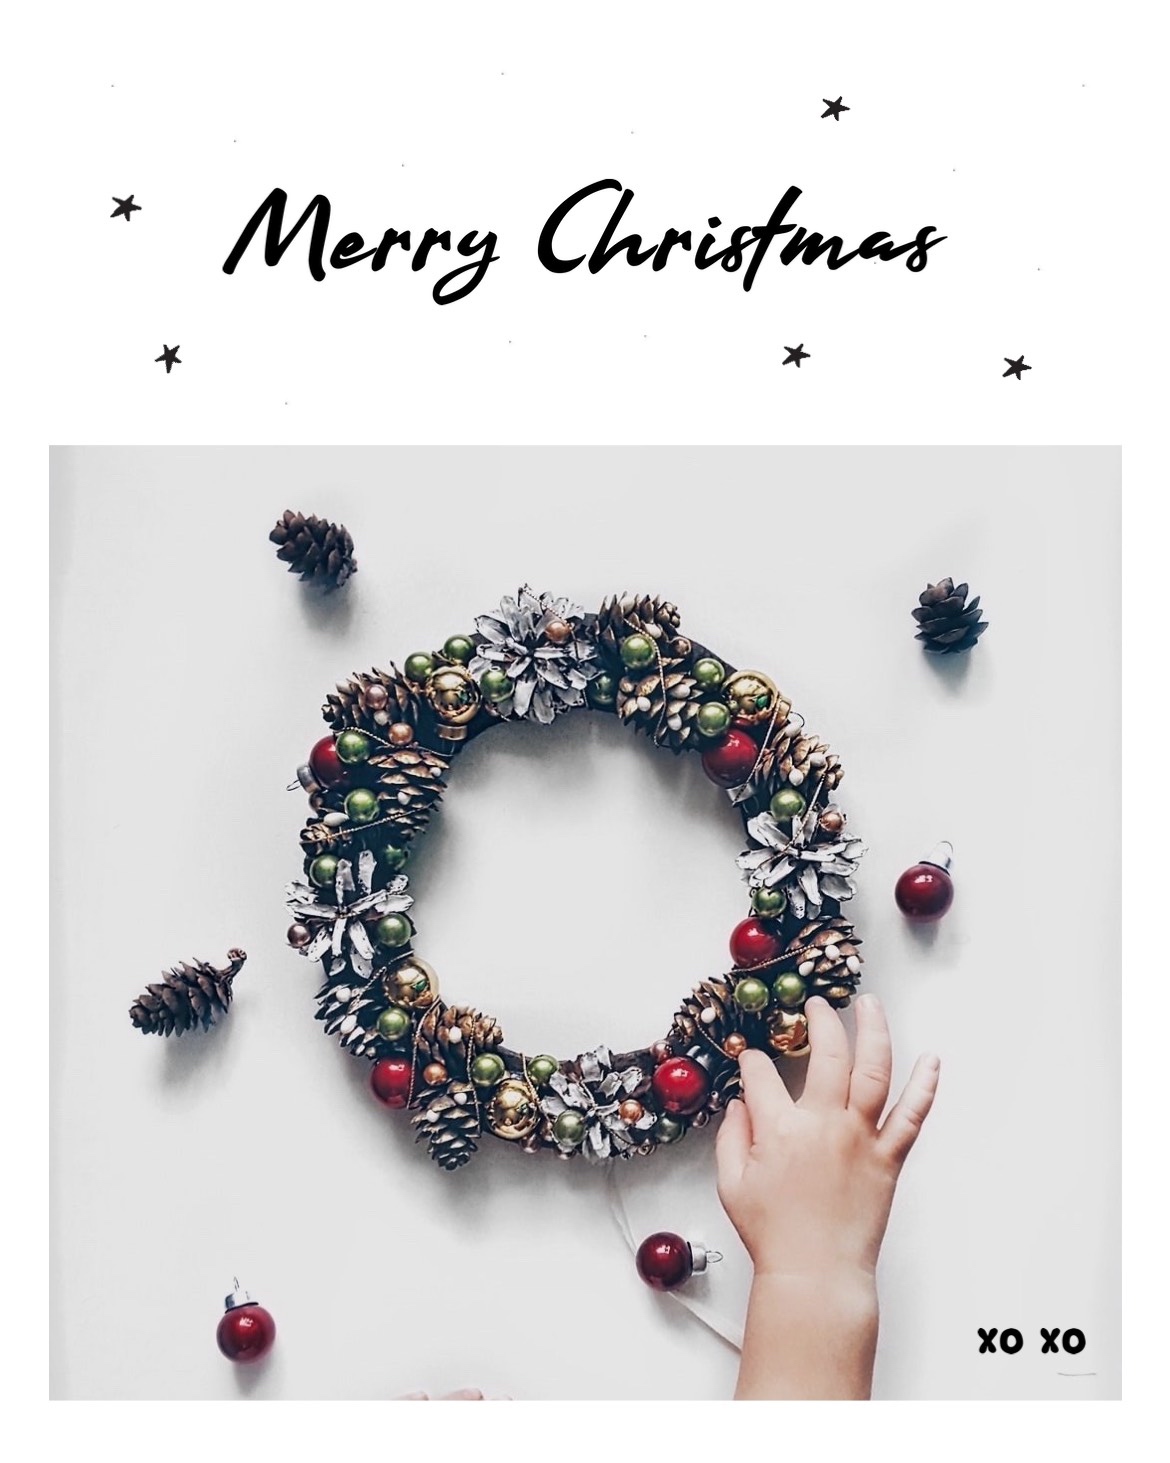 A Person Holding A Christmas Wreath With Pine Cones Merry Christmas Template